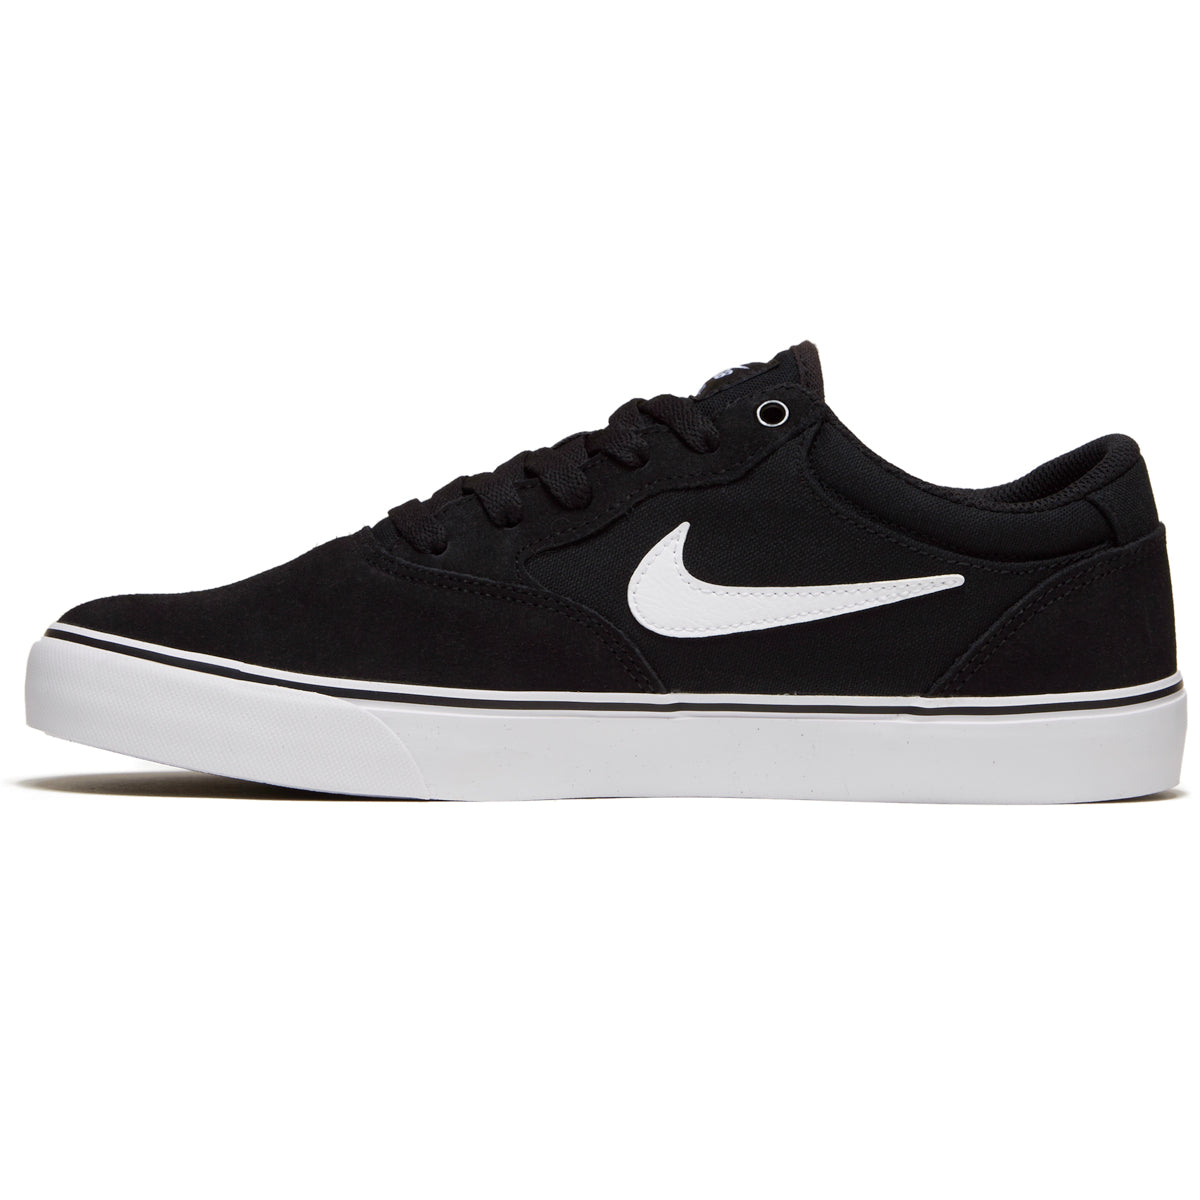 Nike SB Chron 2 Shoes: Revamped Style and Comfort – CCS